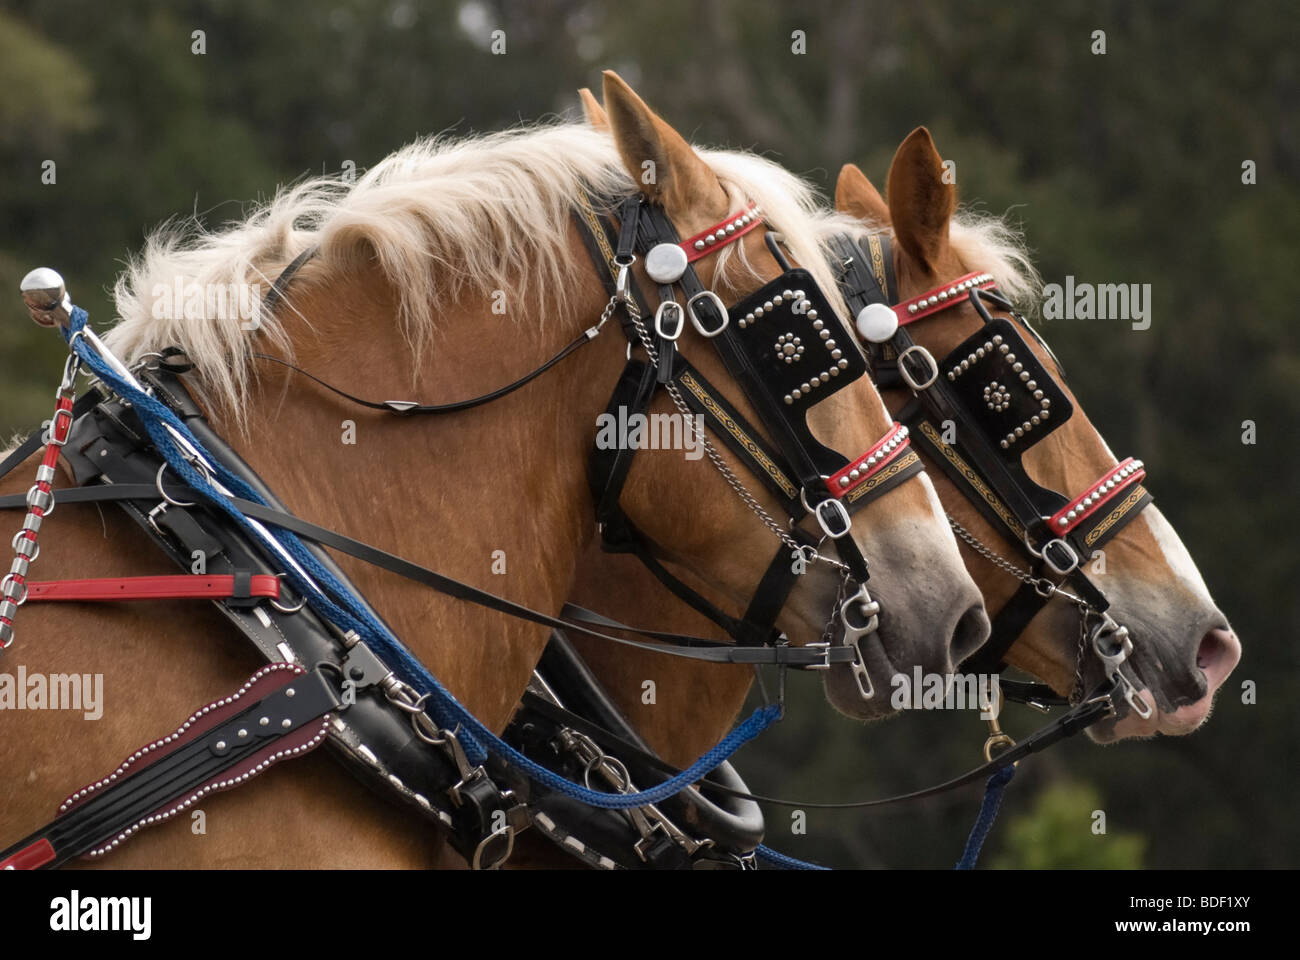 Annual Plow Days Festival at Dudley Farm Historic State Park, Newberry, Florida--National Register of Historic Places. Stock Photo